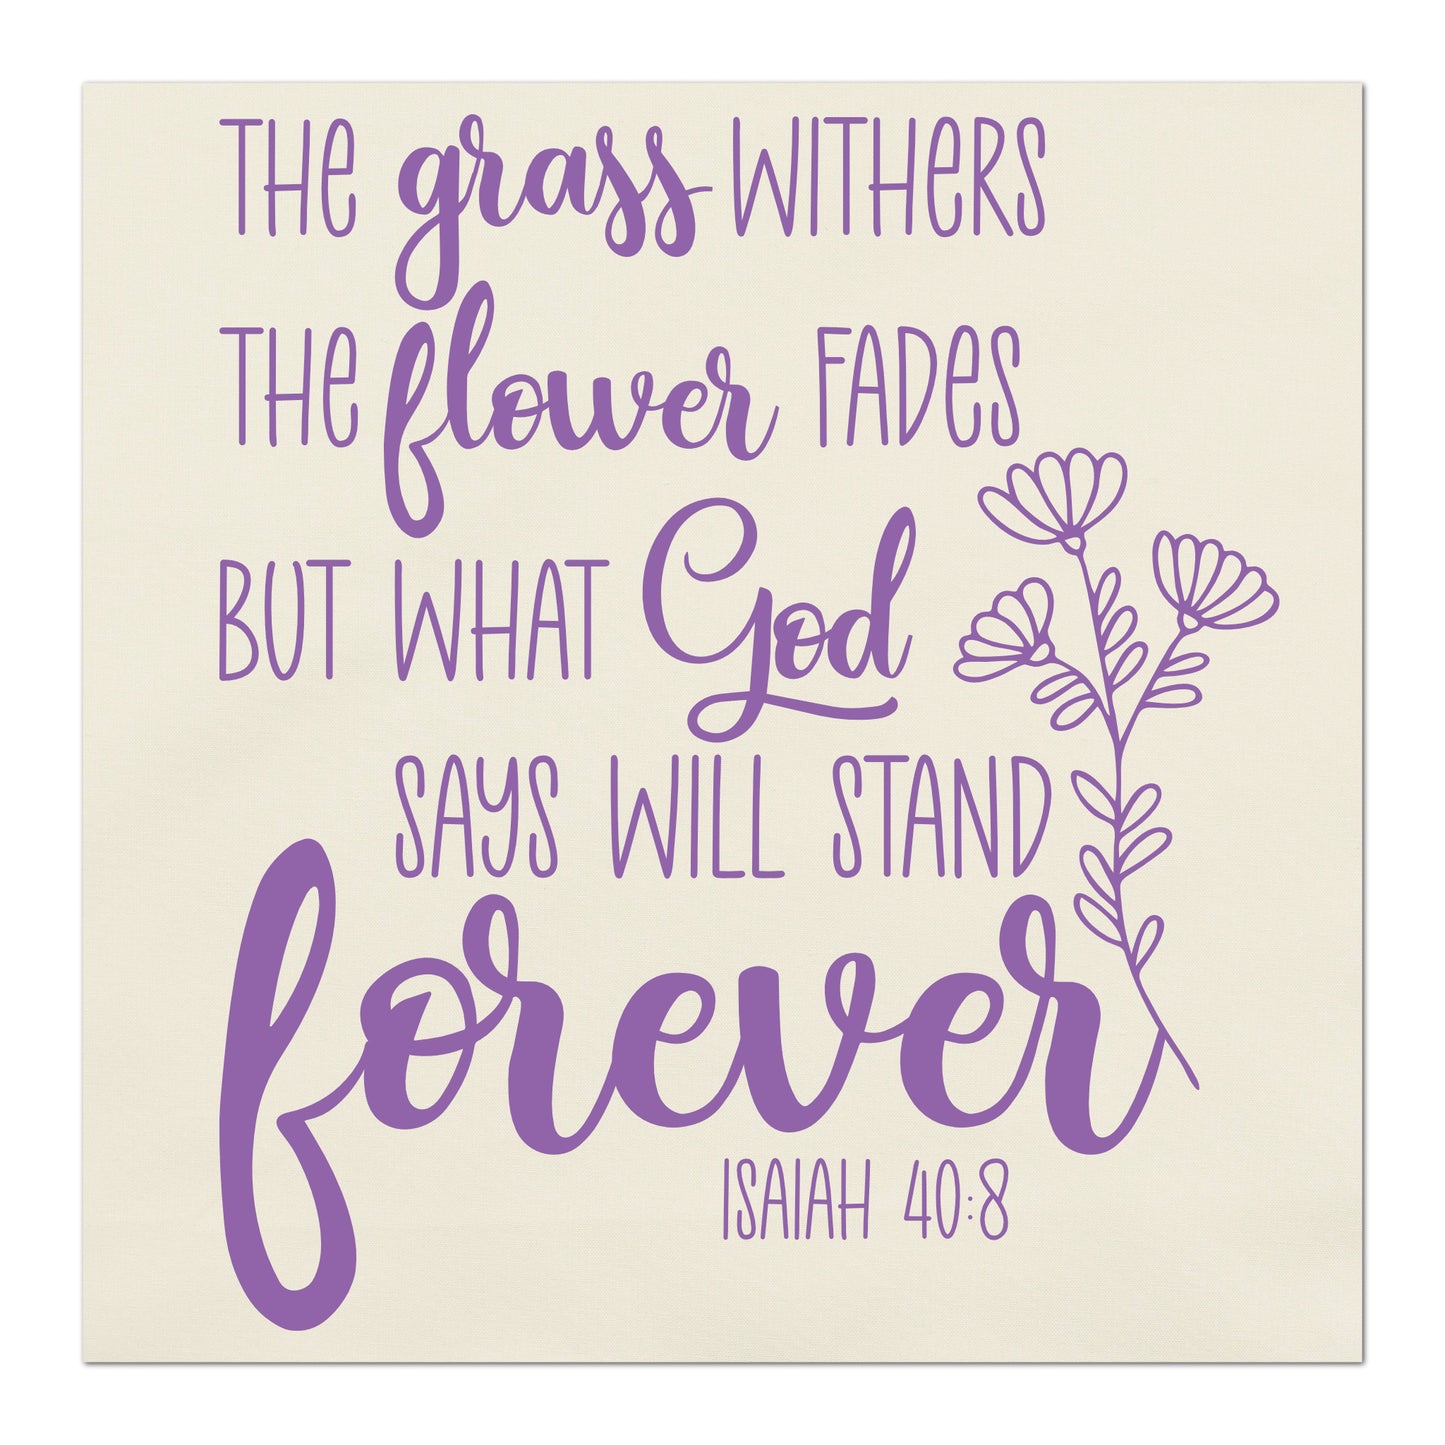 The Grass withers the flower fades but what God says will stand forever.  - Isaiah 40 8,  Christian, Religious Fabric, Quilt, Wall Art, Small Print Fabric, Large Print Fabric